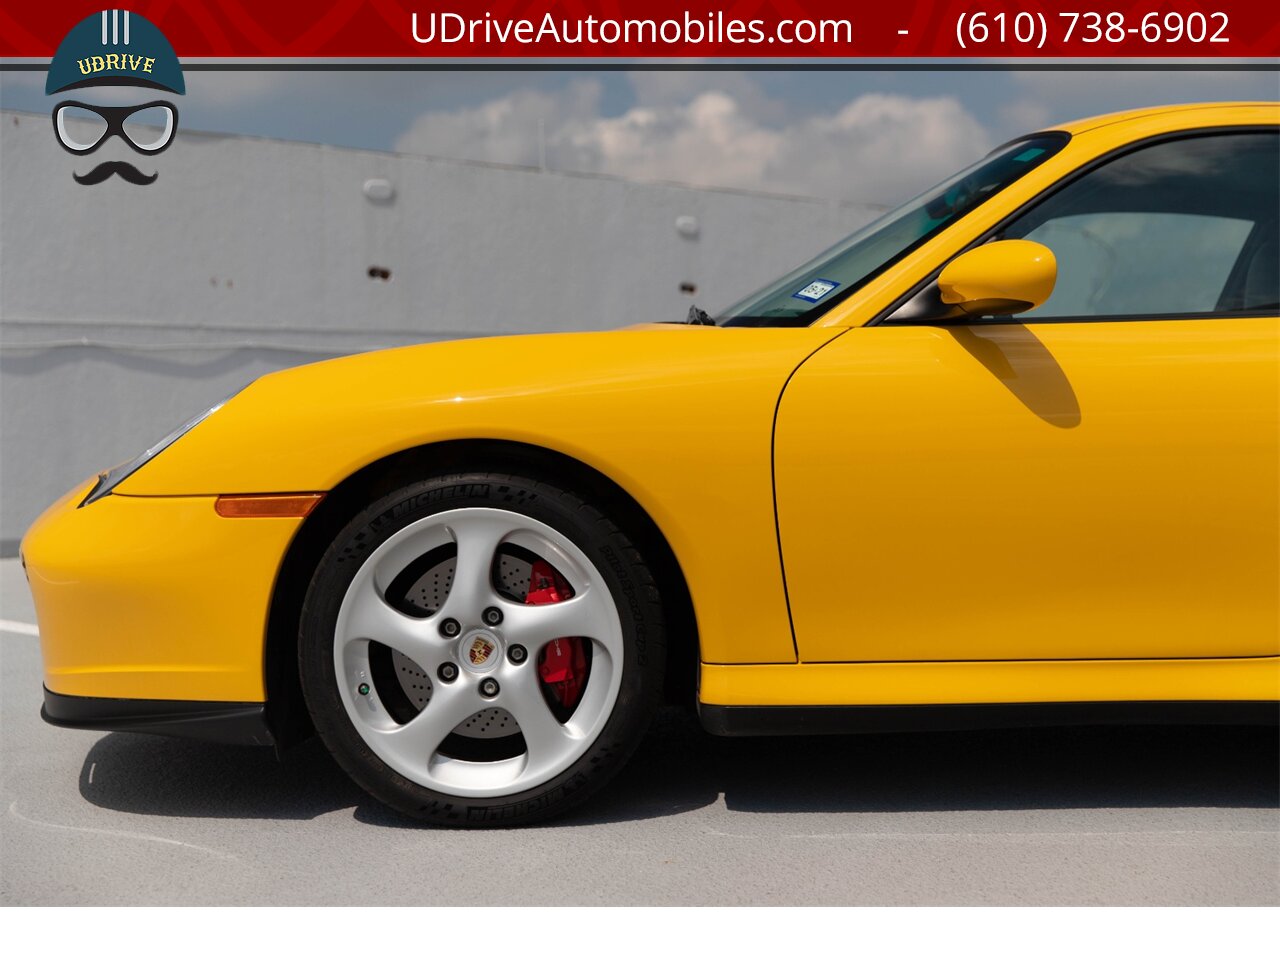 2003 Porsche 911 996 Turbo X50 6Sp Nephrite Green Lthr 9k Miles  Deviating Yellow Stitching Collector Grade BACK AGAIN - Photo 7 - West Chester, PA 19382